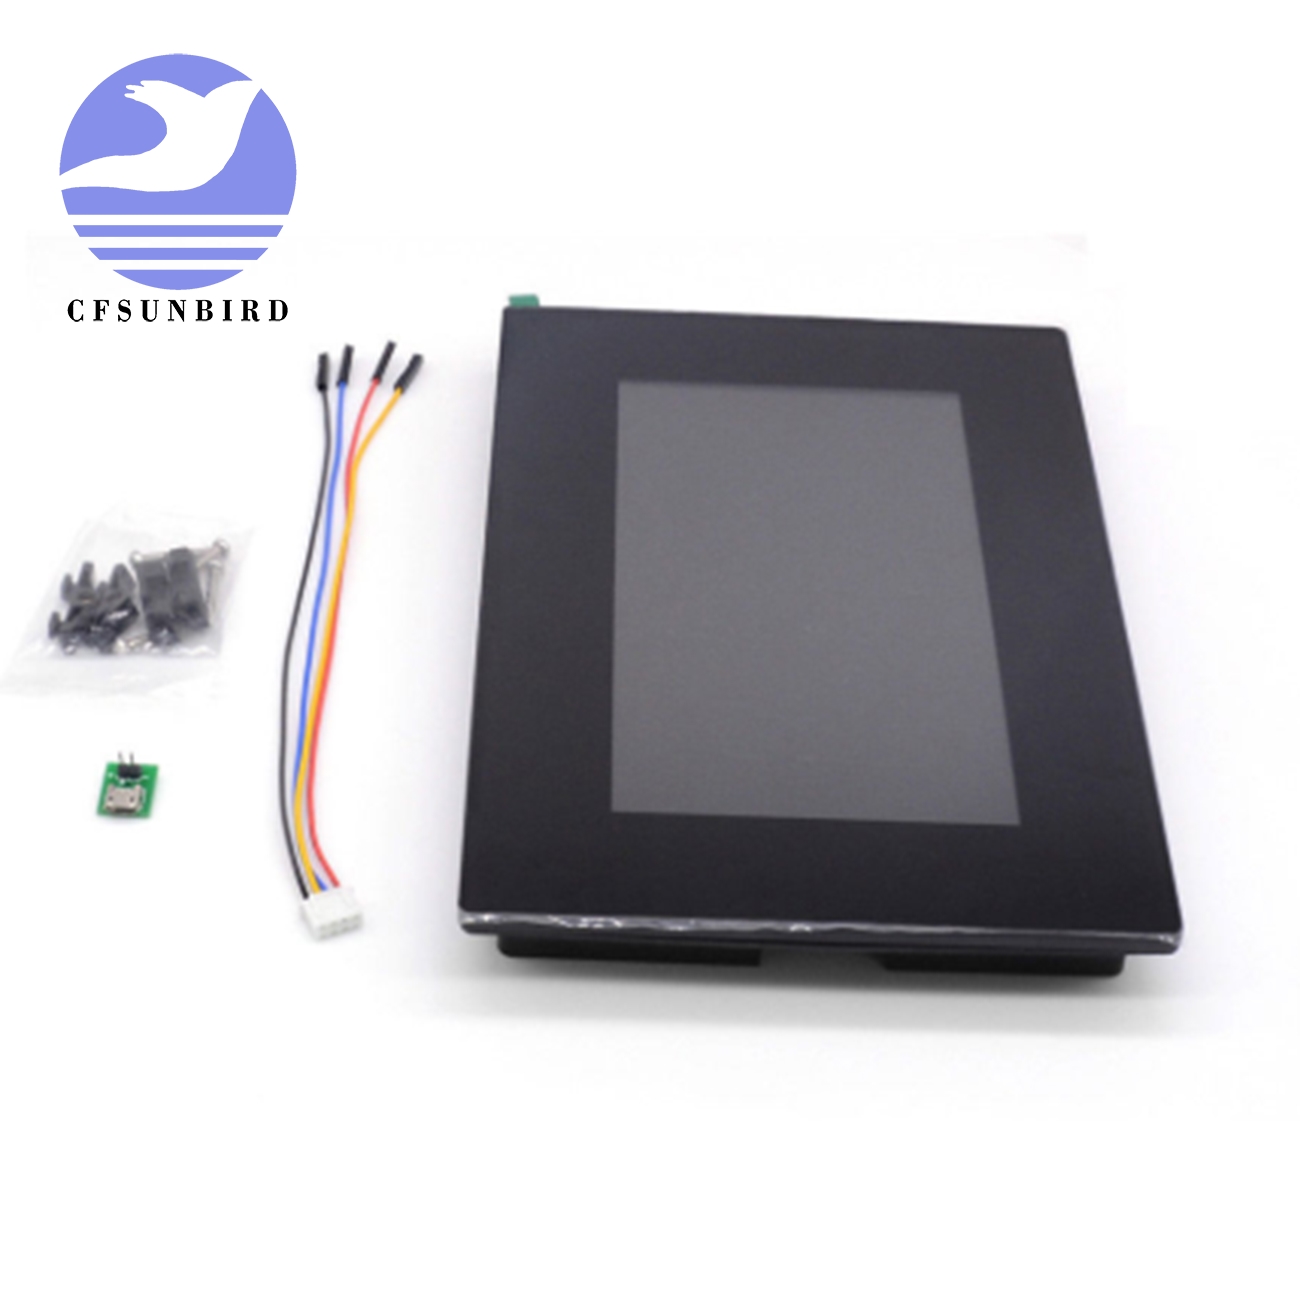 7.0" Nextion Enhanced HMI Intelligent Smart USART UART Serial TFT LCD Module Display Capacitive Multi-Touch Panel w/ Enclosure